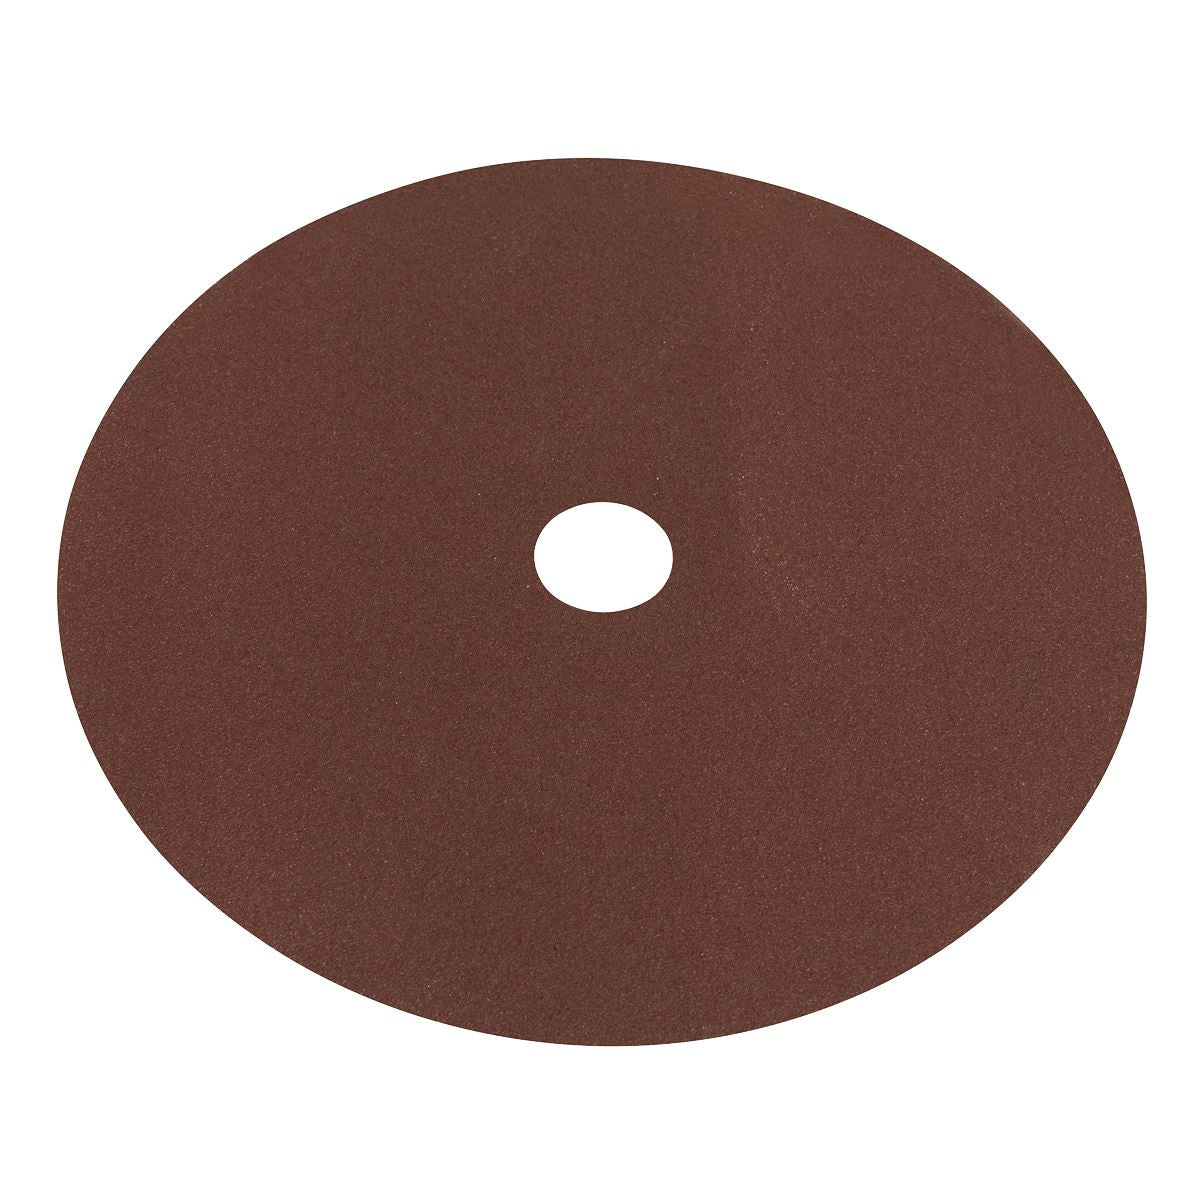 Worksafe by Sealey Fibre Backed Disc Ø175mm - 80Grit Pack of 25